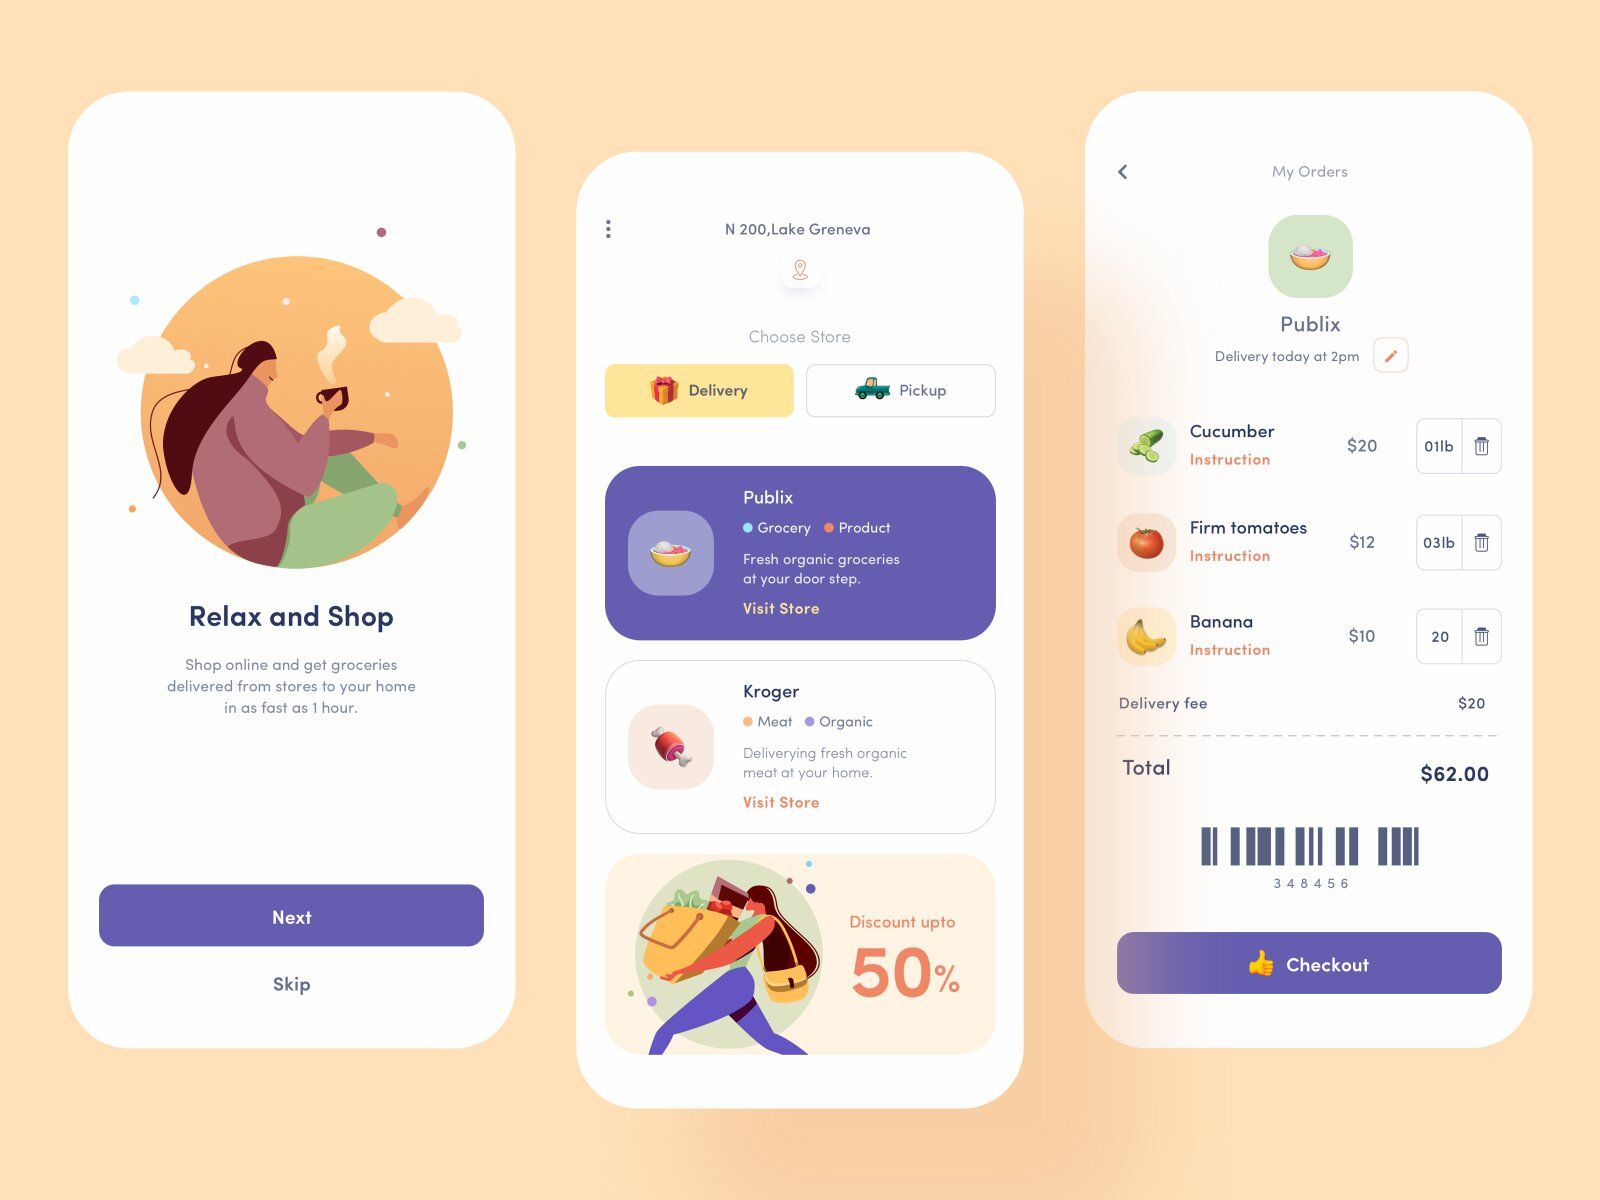 The checkout screen in an on-demand food delivery app is an important stage where customers check their orders and pay for them 